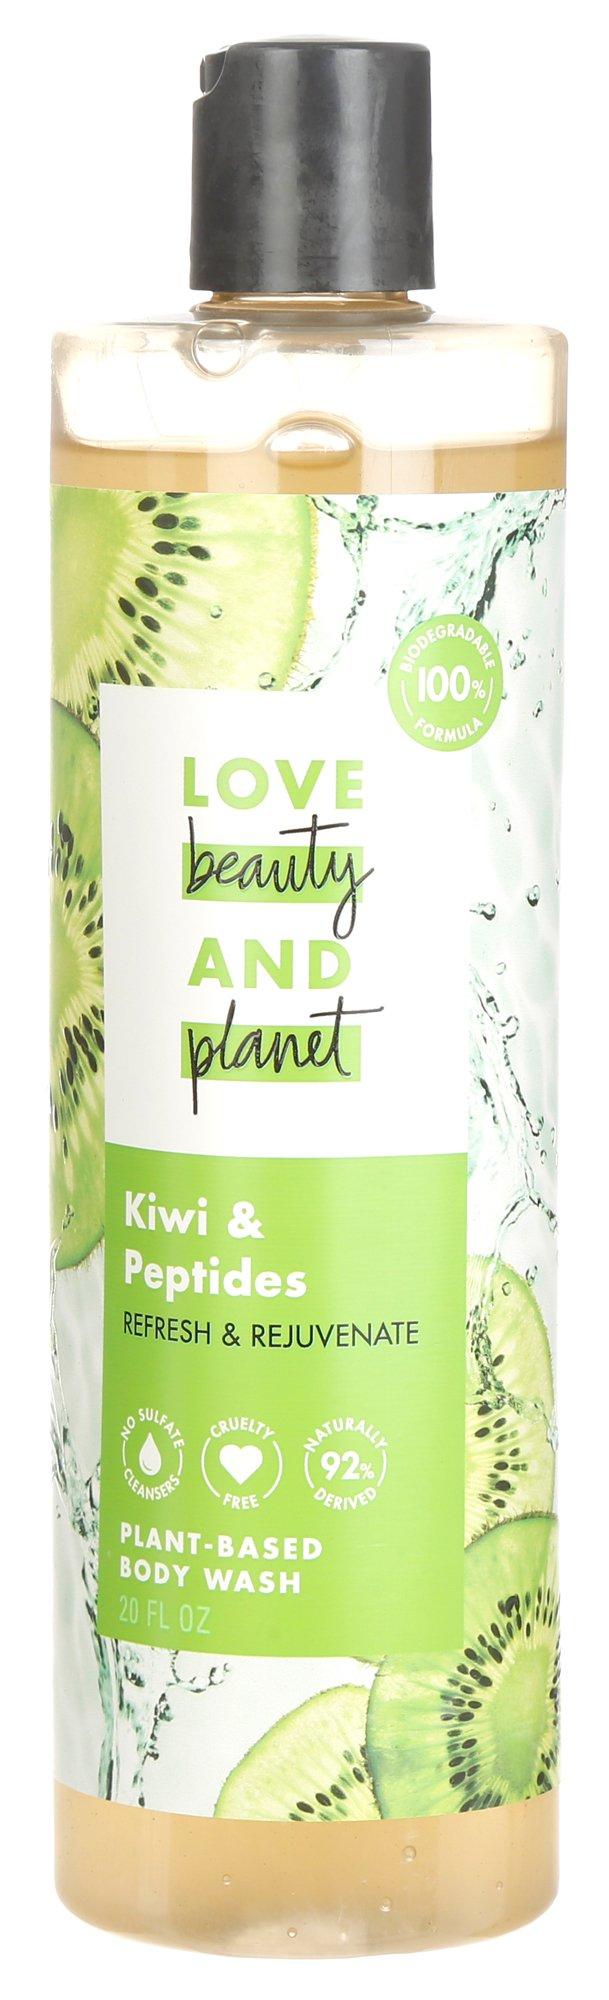 20 oz Love Beauty and Planet Plant Based Body Wash